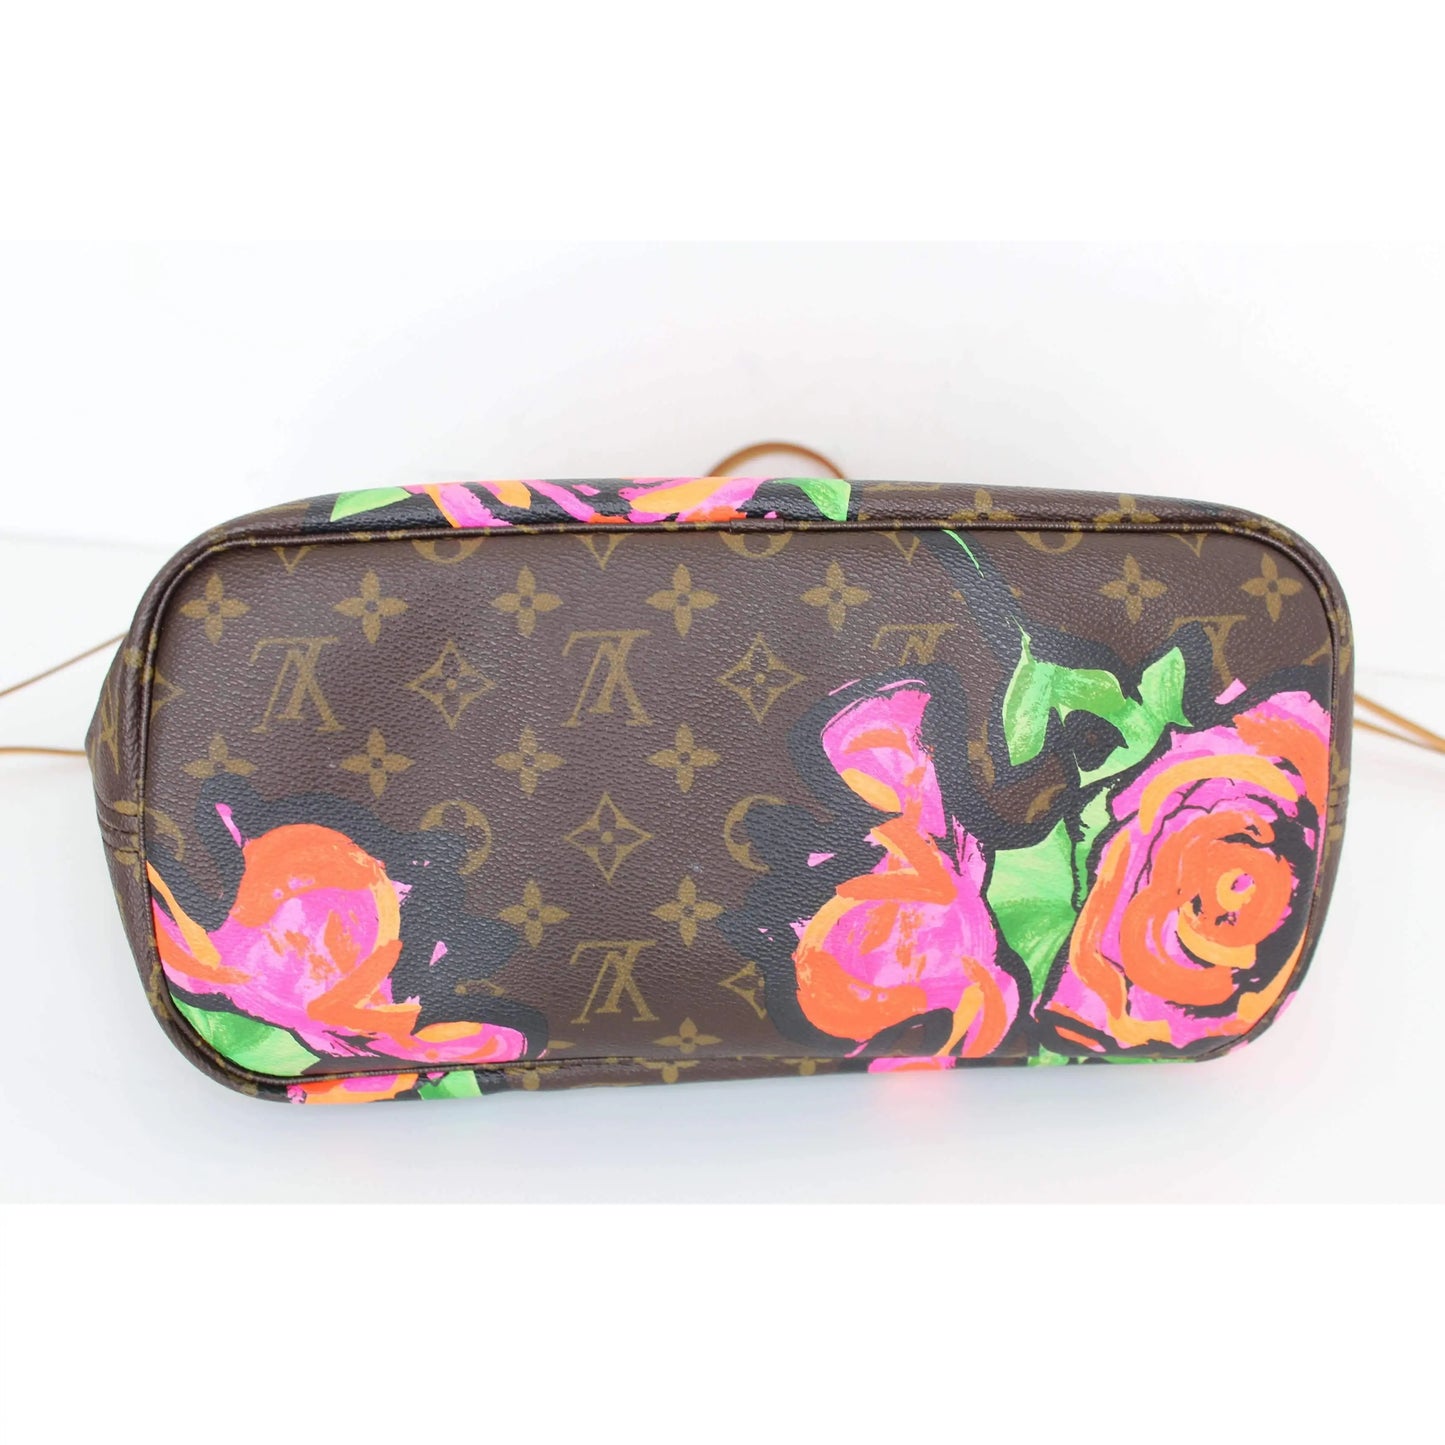 Load image into Gallery viewer, Louis Vuitton Louis Vuitton Neverfull MM Stephen Sprouse Roses Limited Edition Bag LVBagaholic
